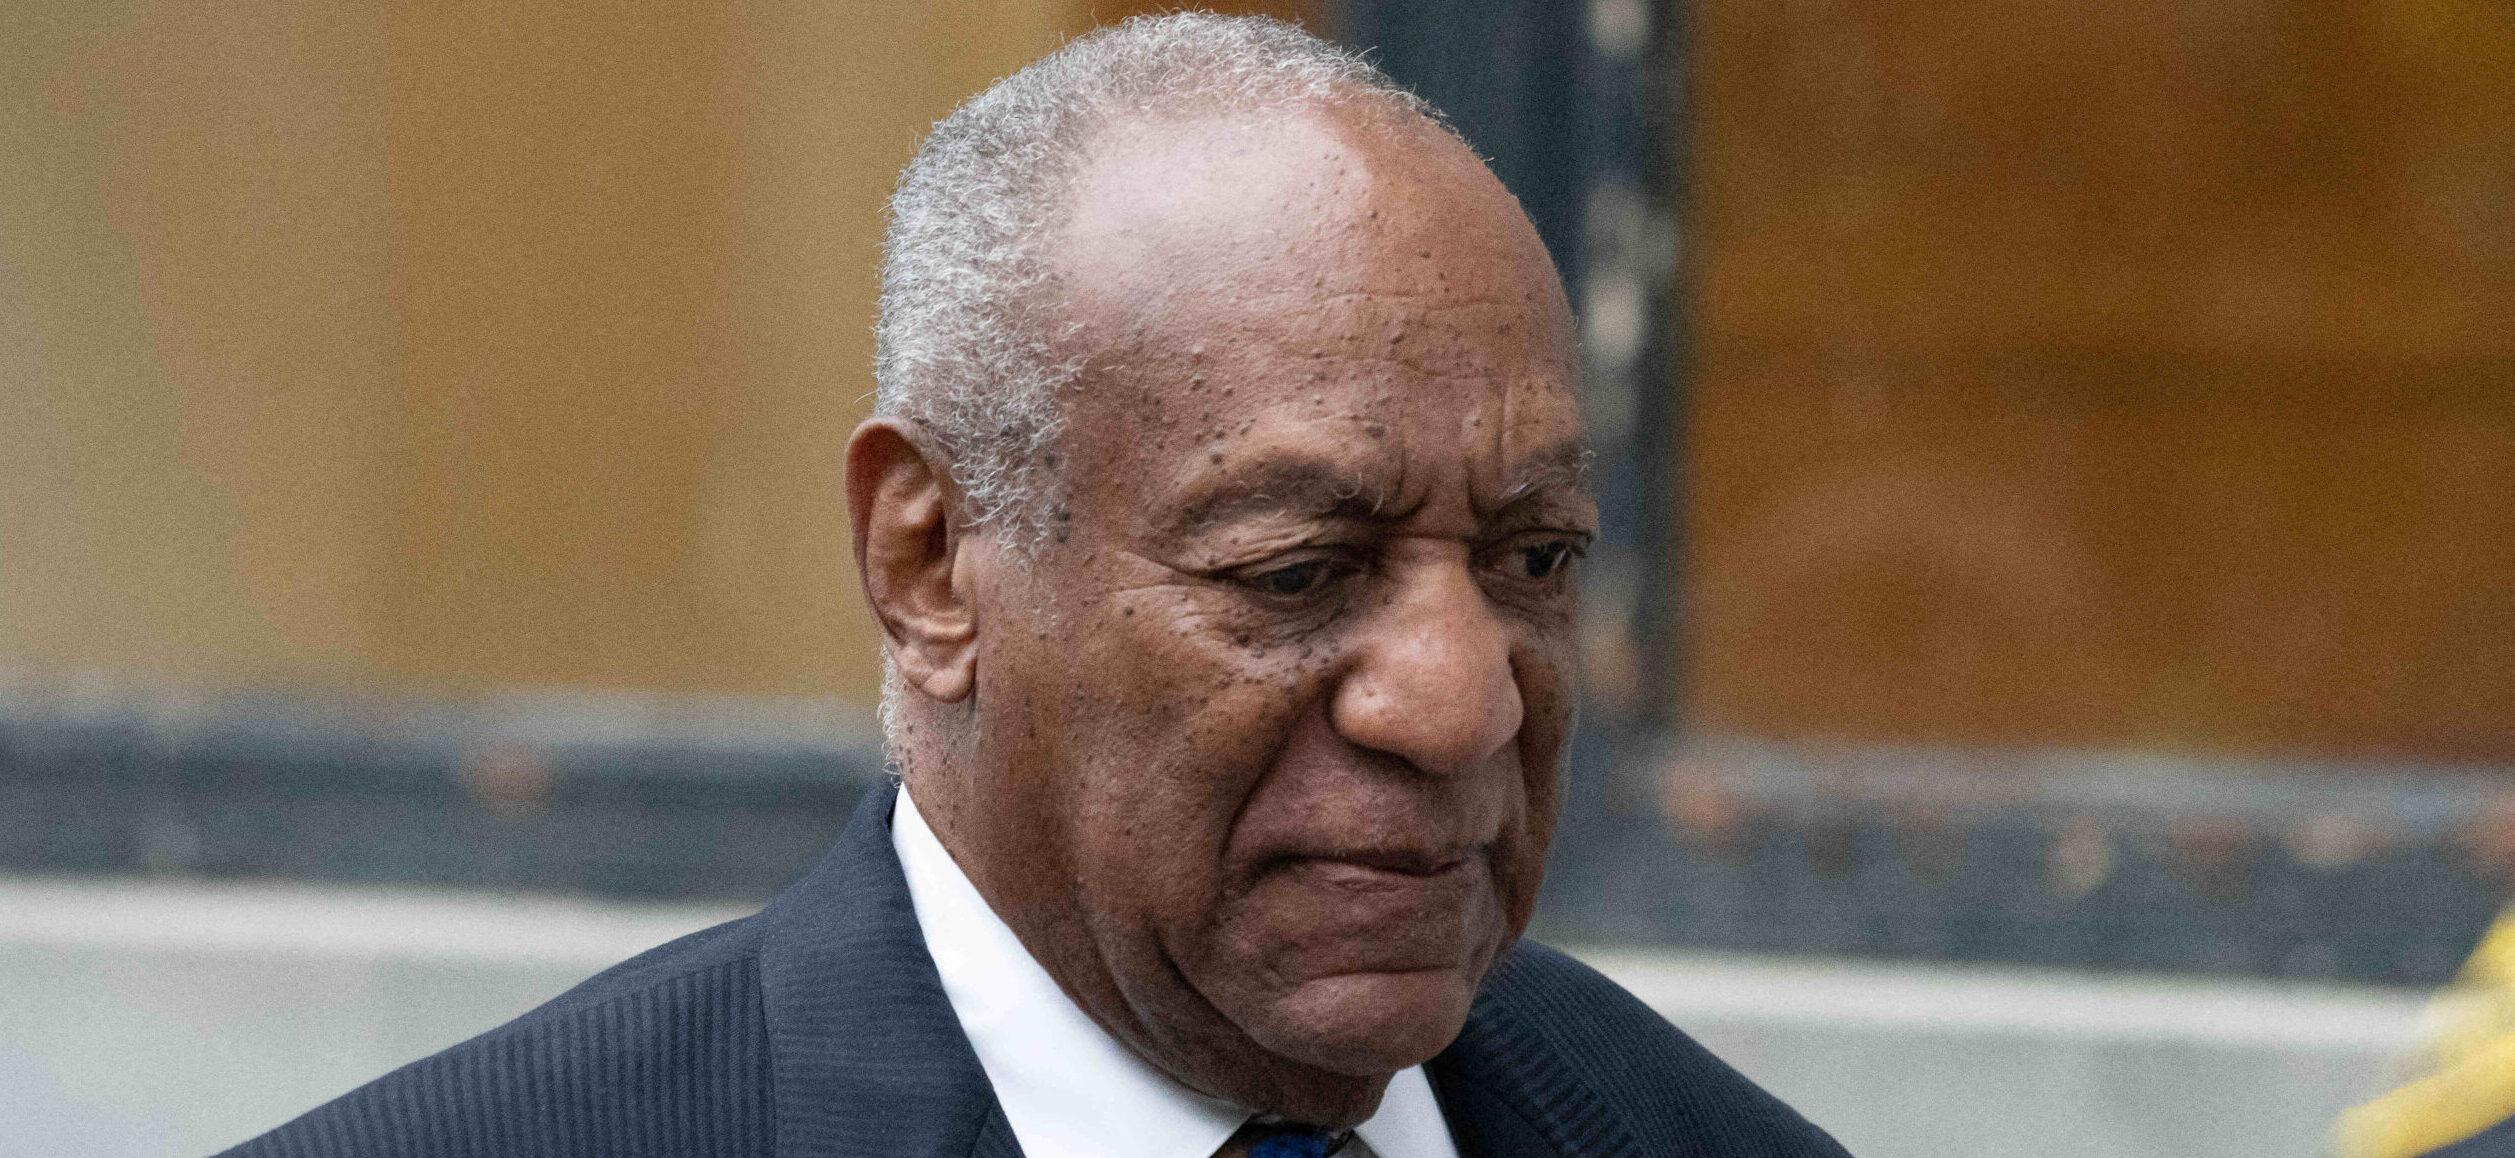 Bill Cosby’s Wife Camille Is Not Leaving Him Despite Divorce Rumors